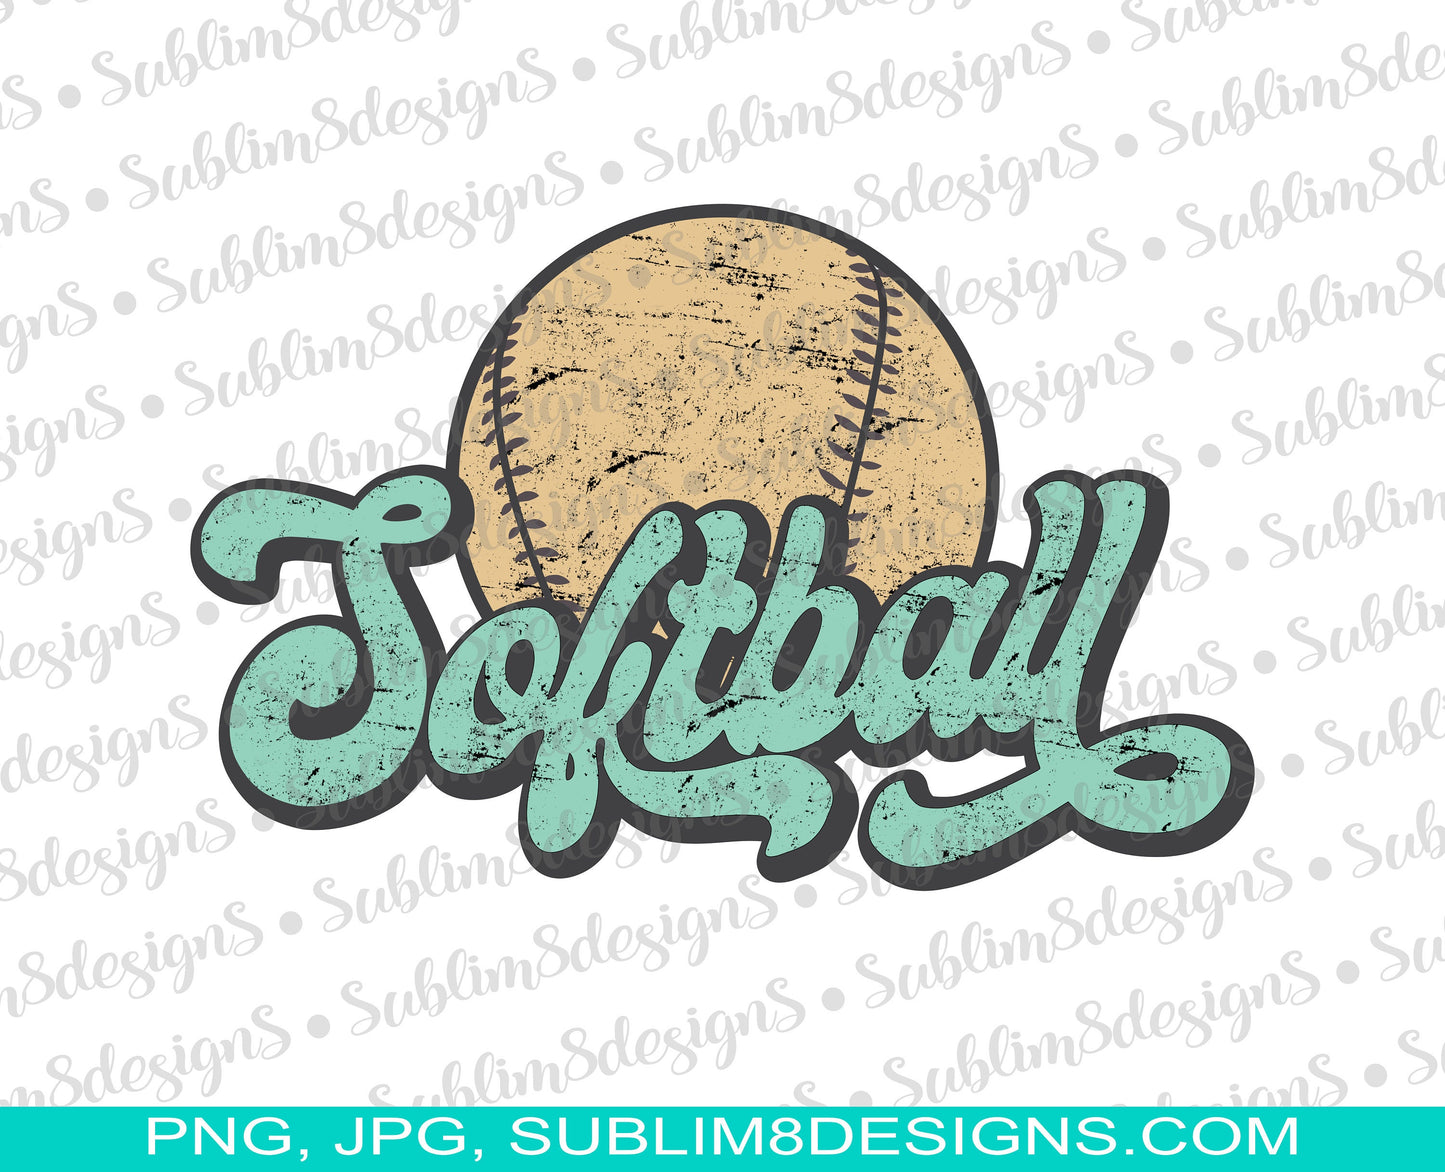 Softball Vintage Distressed, PNG and JPG ONLY